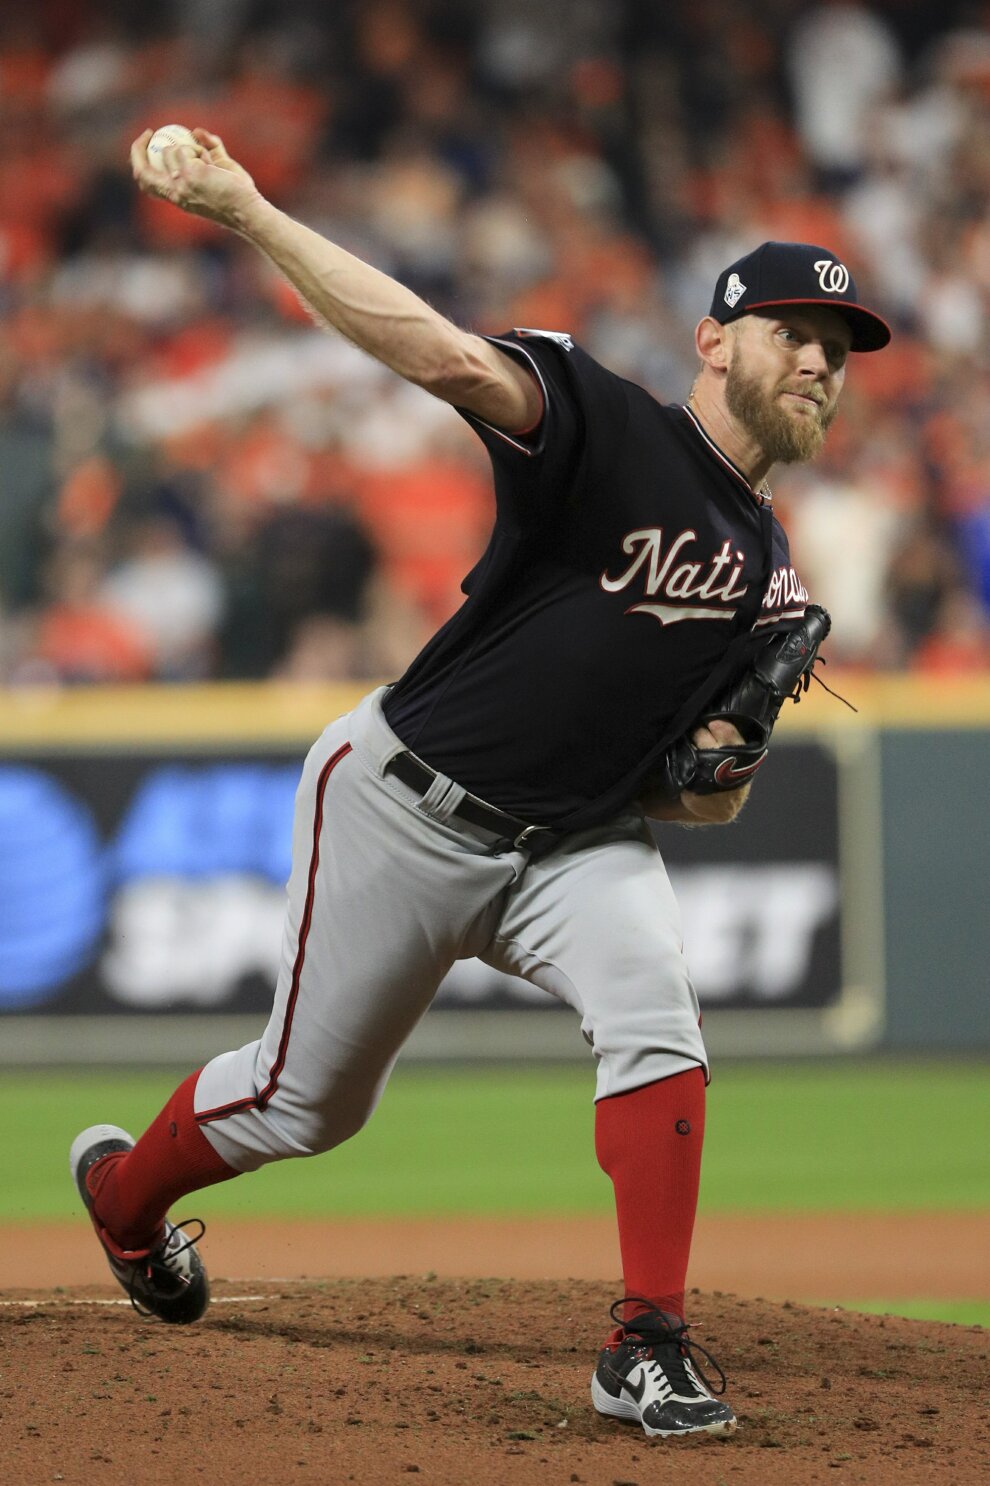 Scherzer, other latest $100M contracts not on All-Star teams